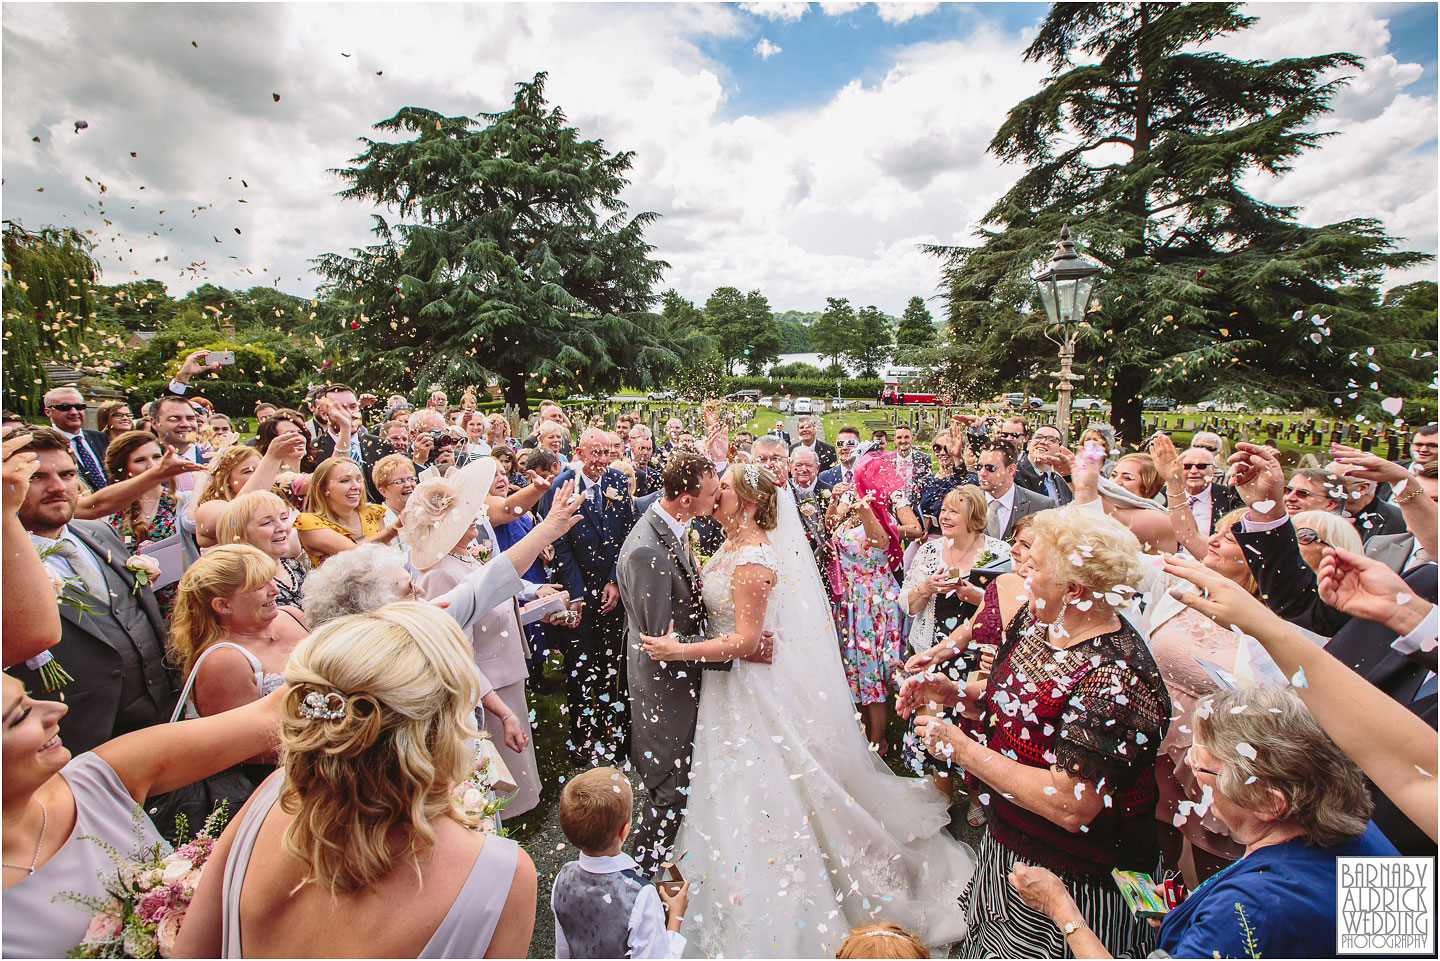 A newly wed couple kiss under a dramatic confetti toss at their wedding at Alderford Lake in Shropshire